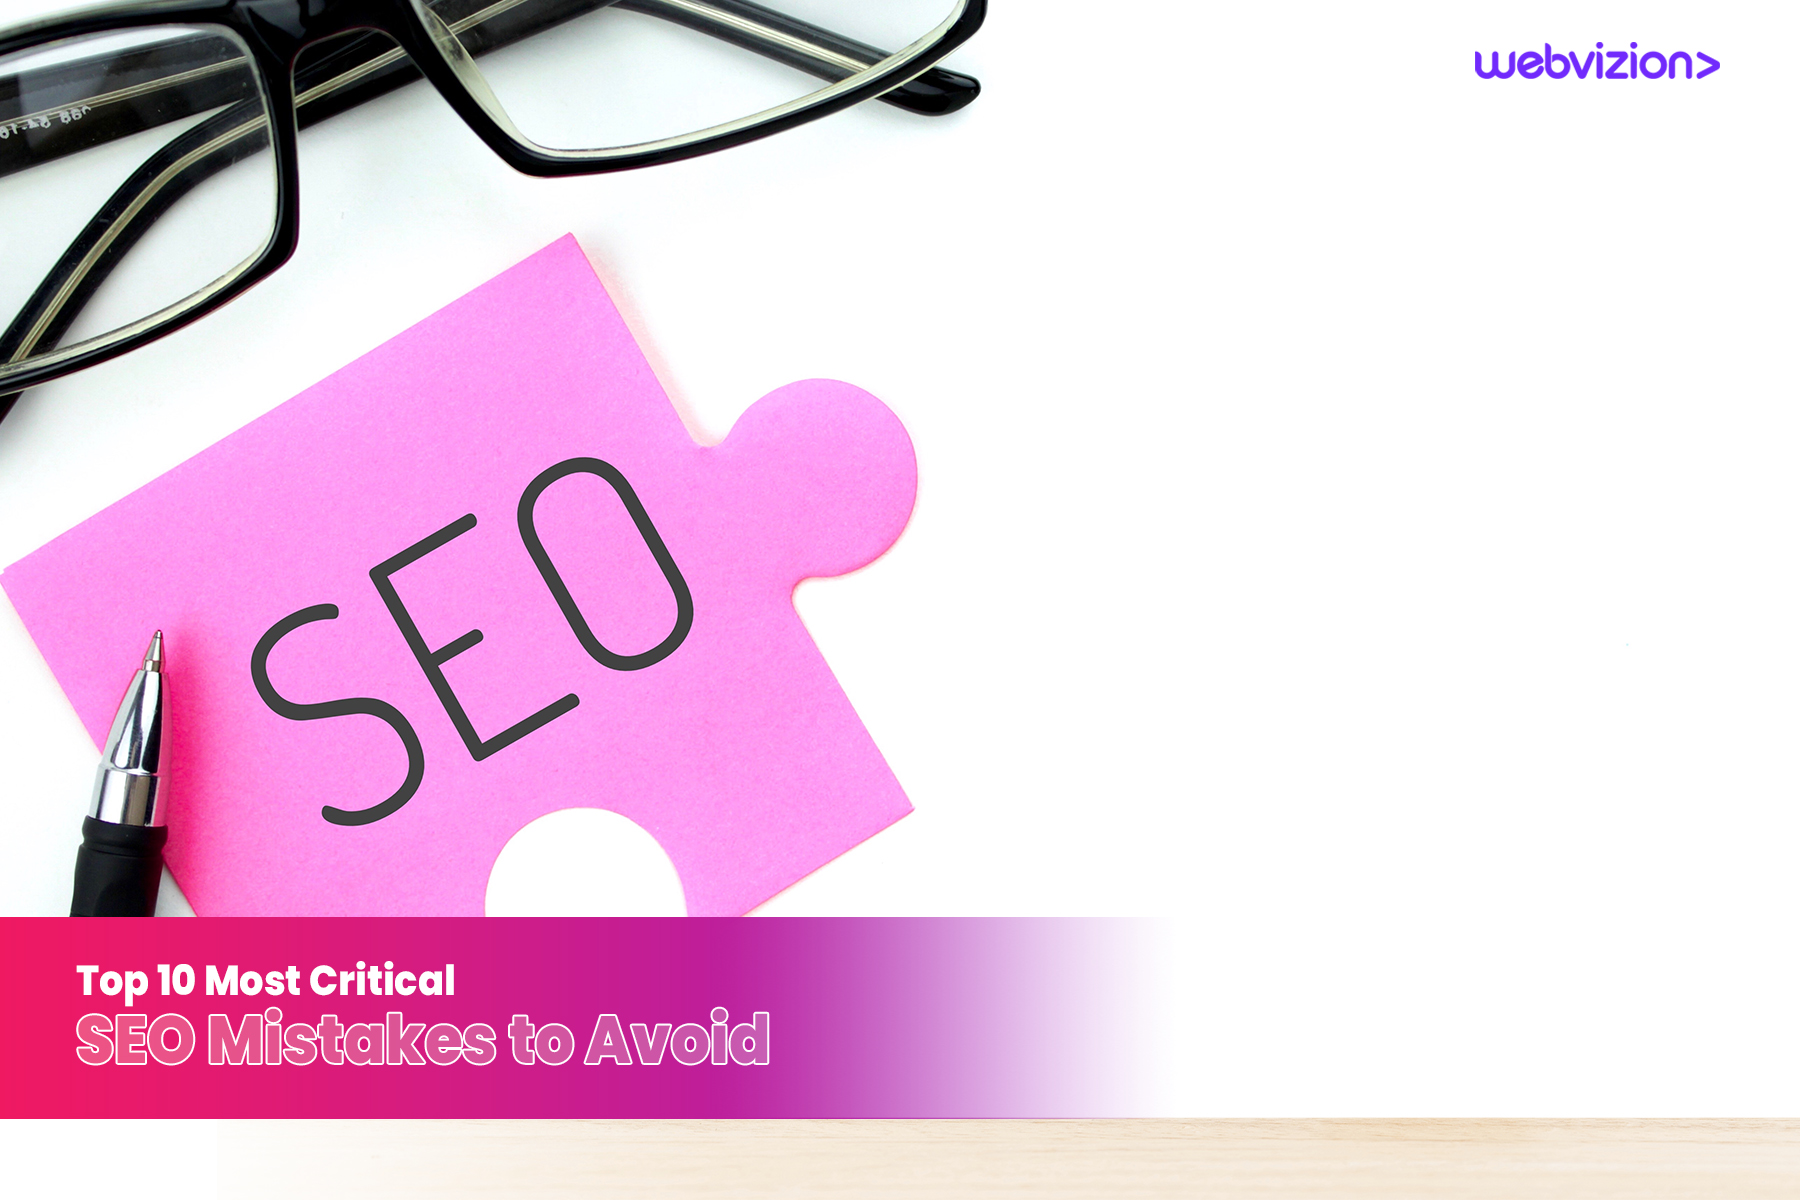 Top 10 Most Critical SEO Mistakes to Avoid